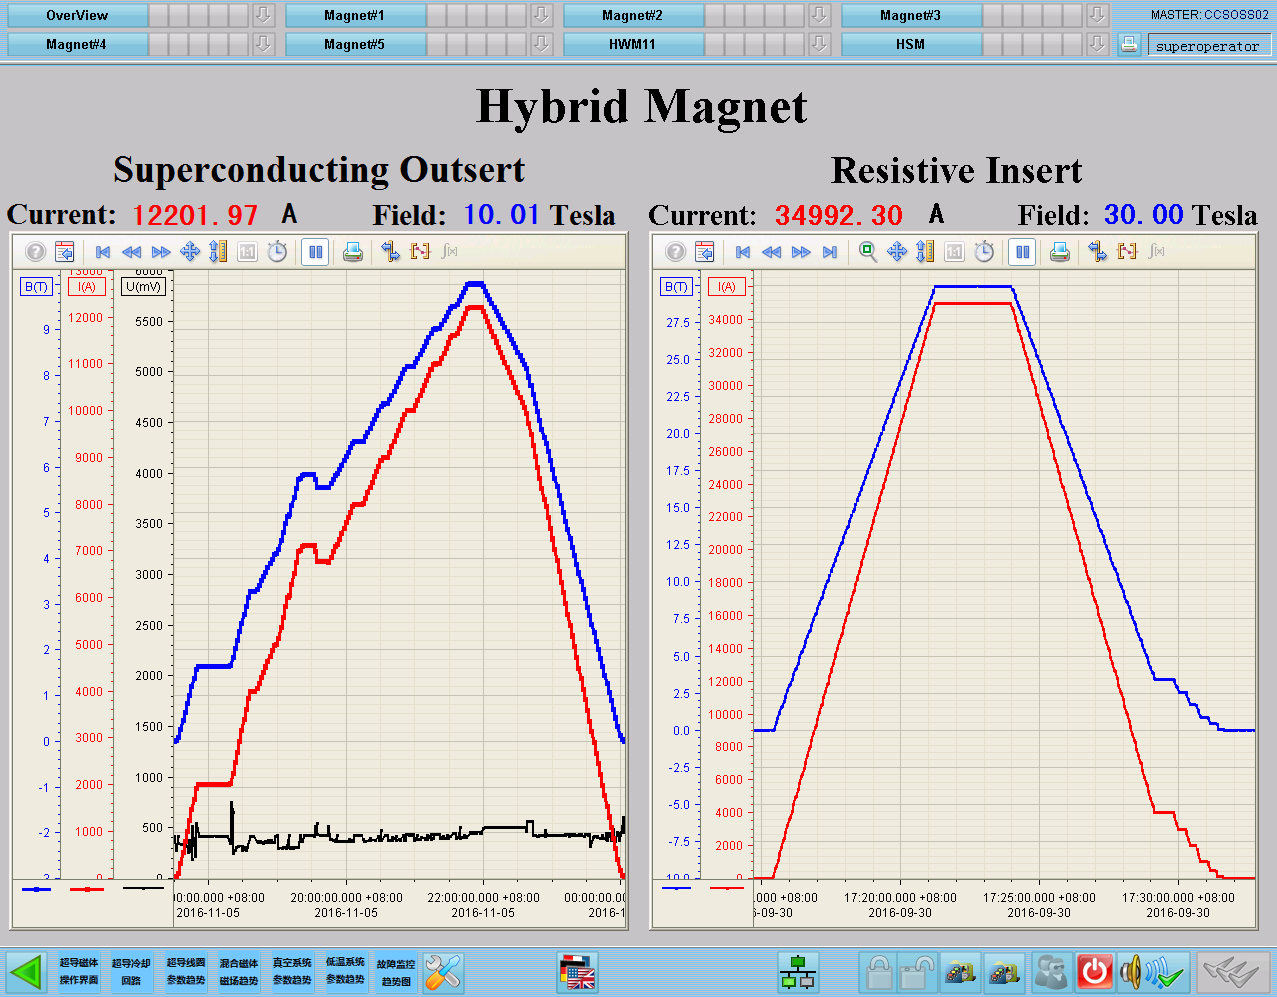 Test results of the 10T superconducting magnet outsert and 30T resistive magnet insert